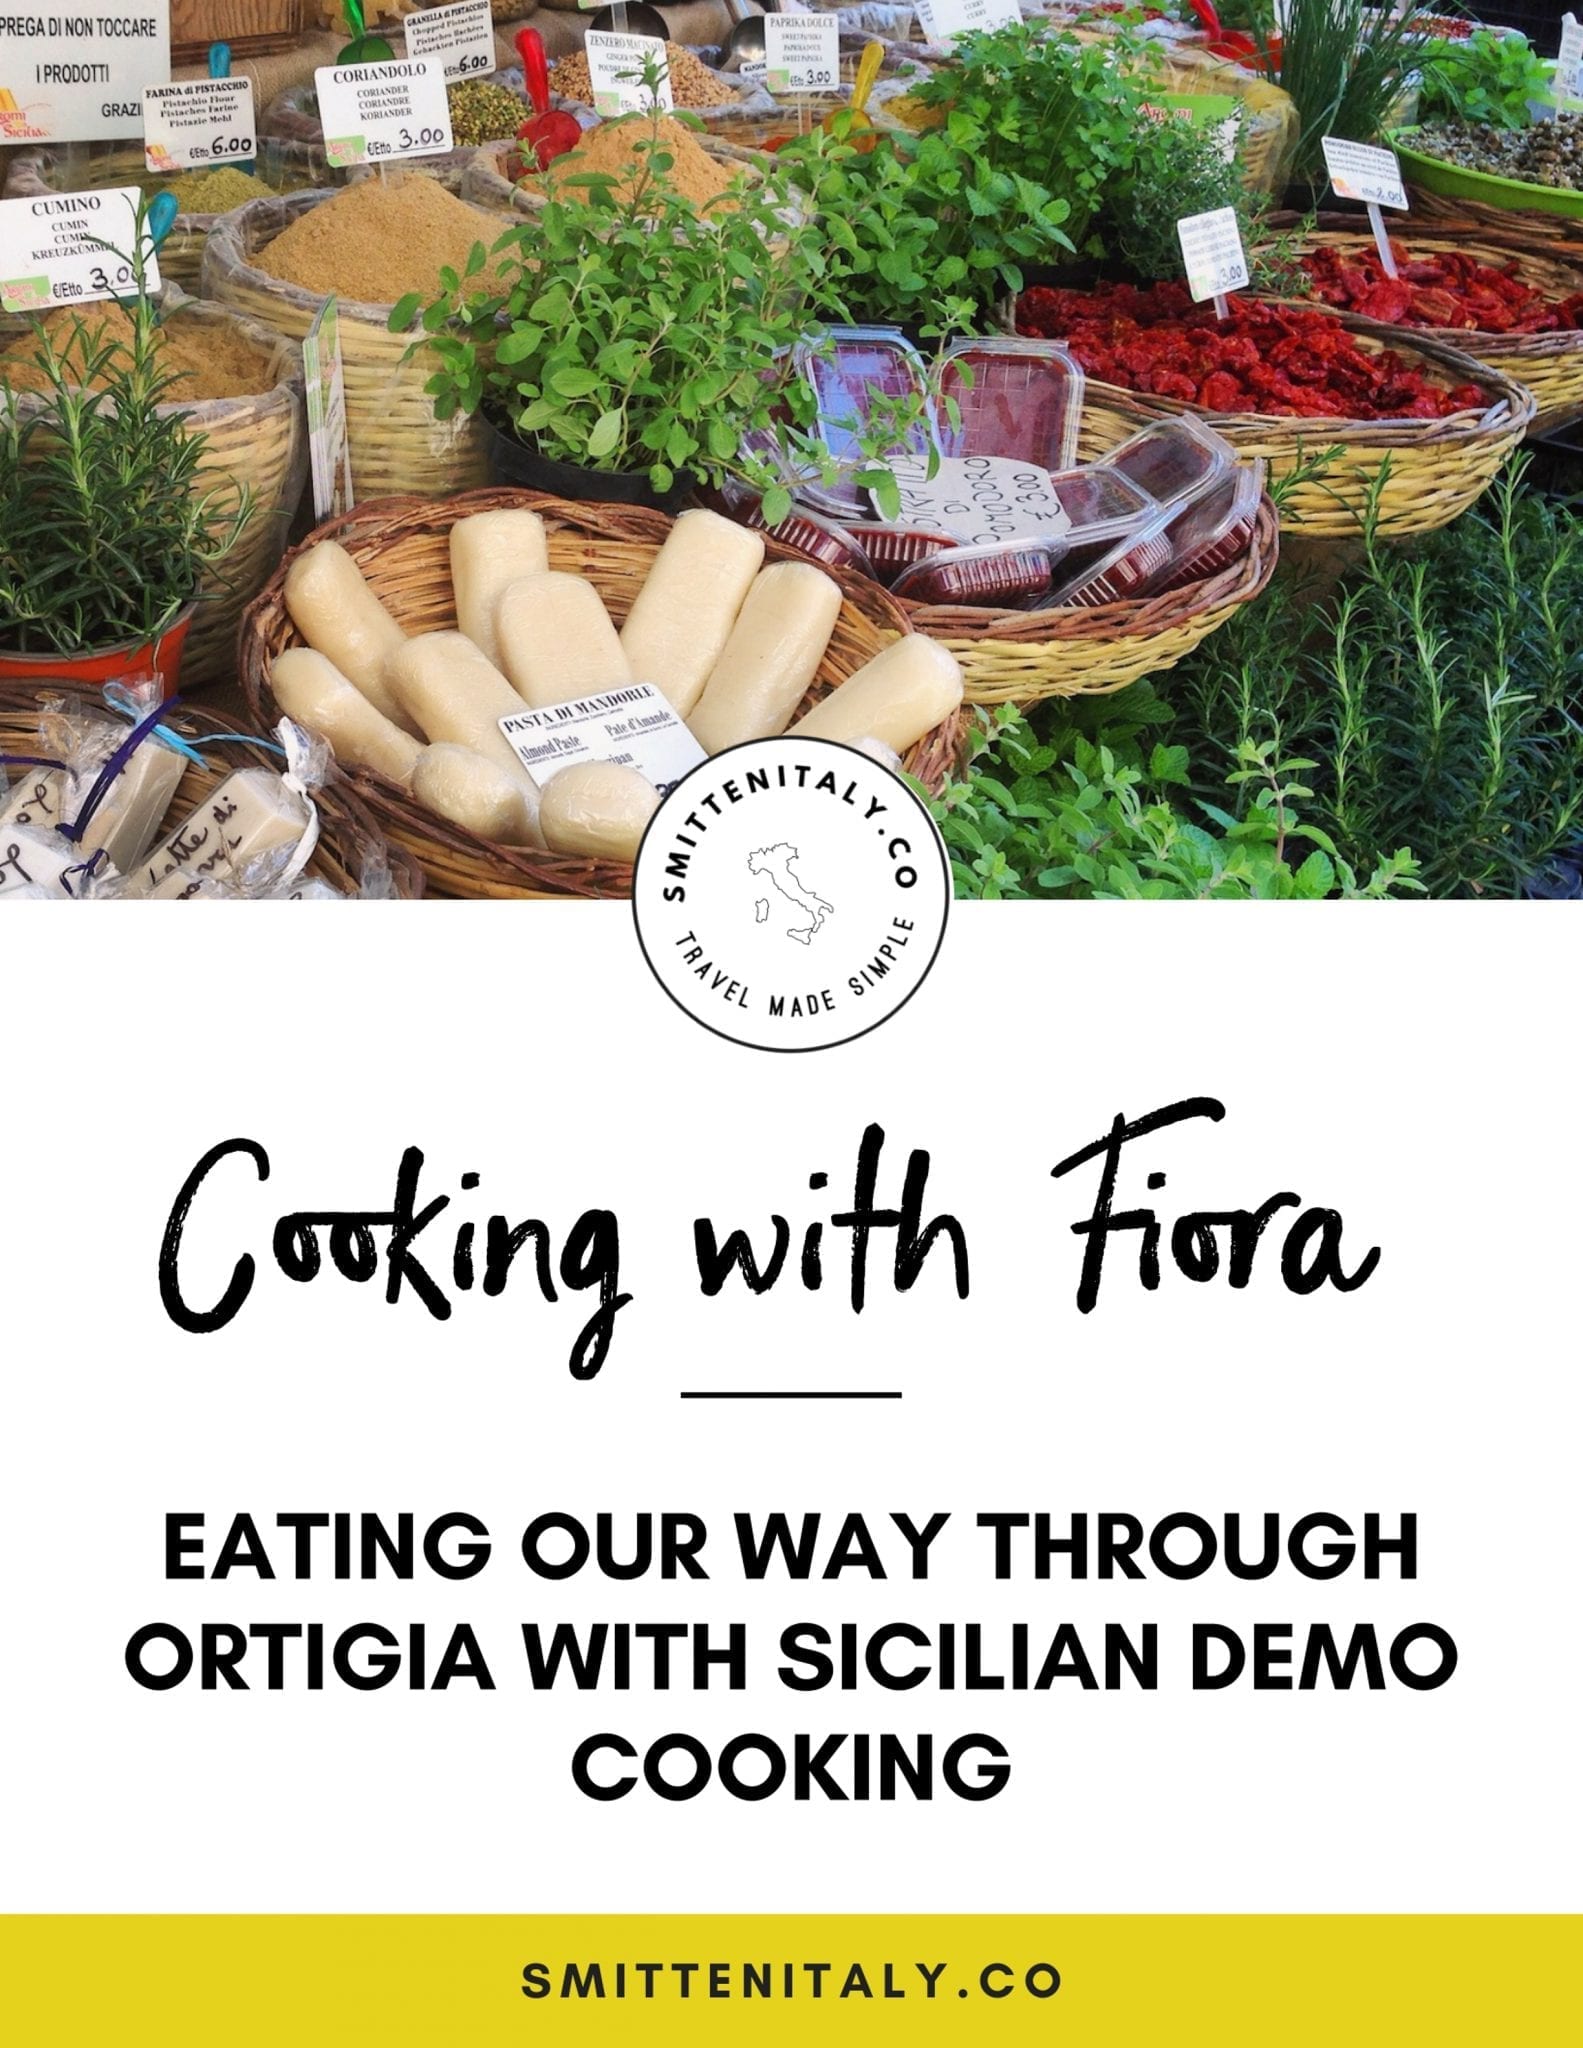 Cooking with Fiora- Sicilian Demo Cooking 